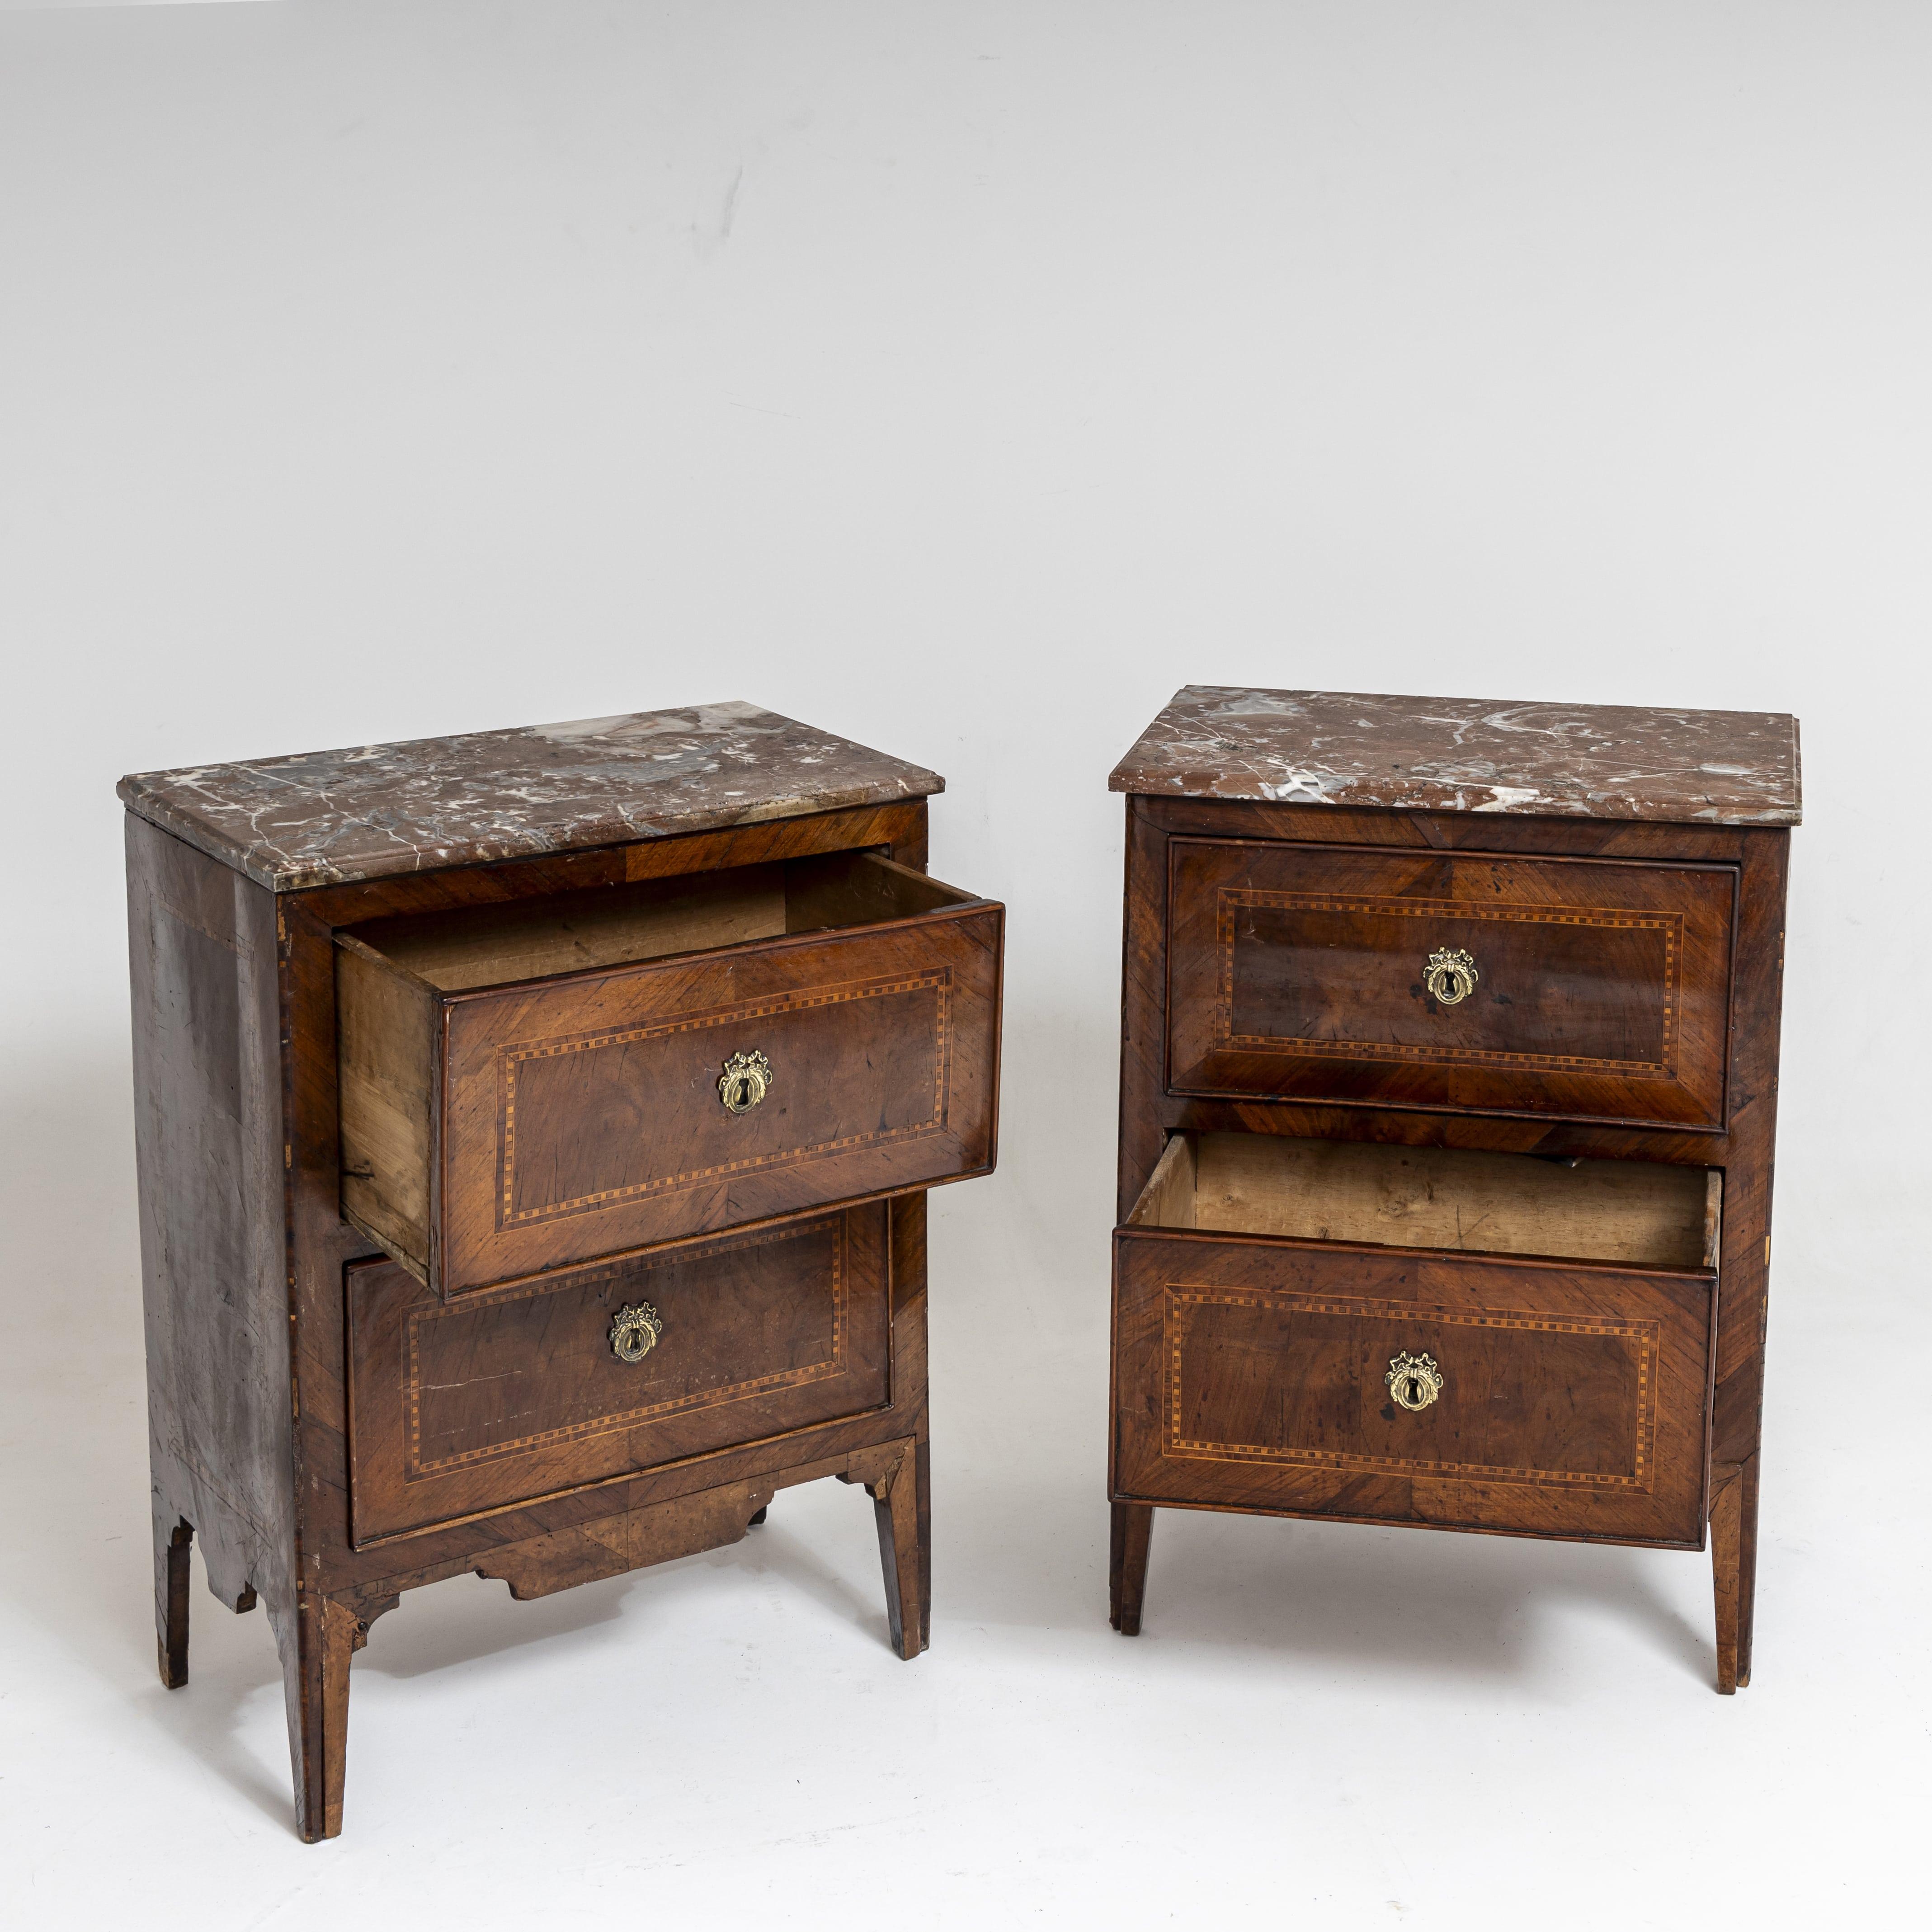 Pair of neoclassical chests of drawers featuring red and white marble tops and a body with walnut veneer and two drawers. The drawer fronts boast intricate inlays and are adorned with bronze fittings. These chests of drawers retain their original,